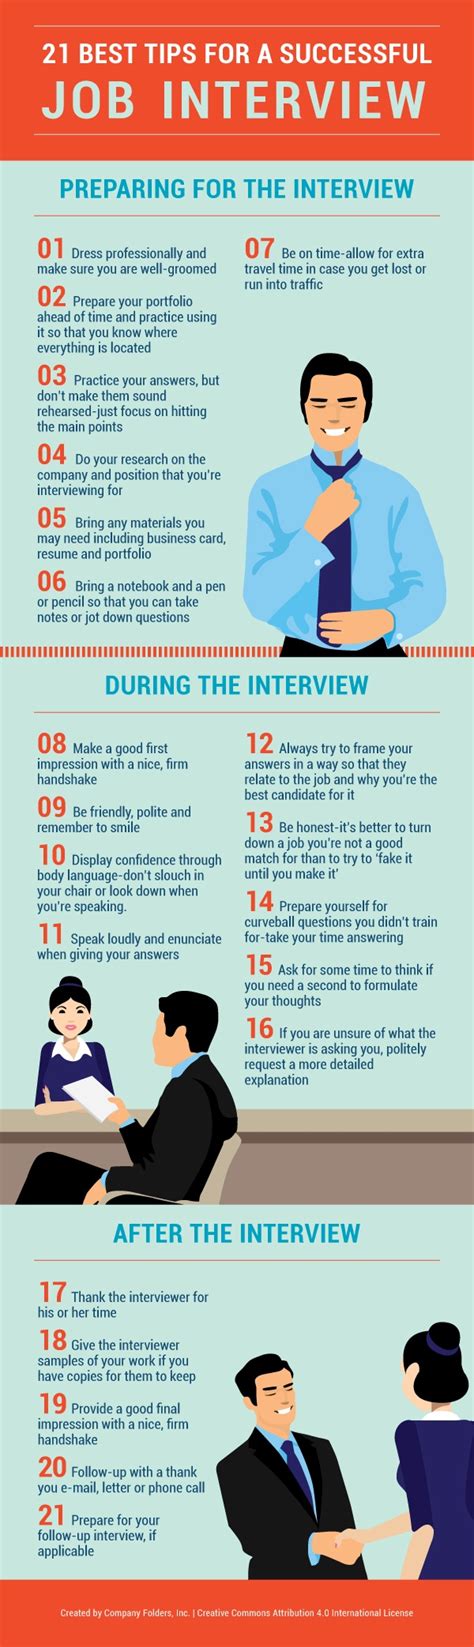 What happens if you don't attend an interview?